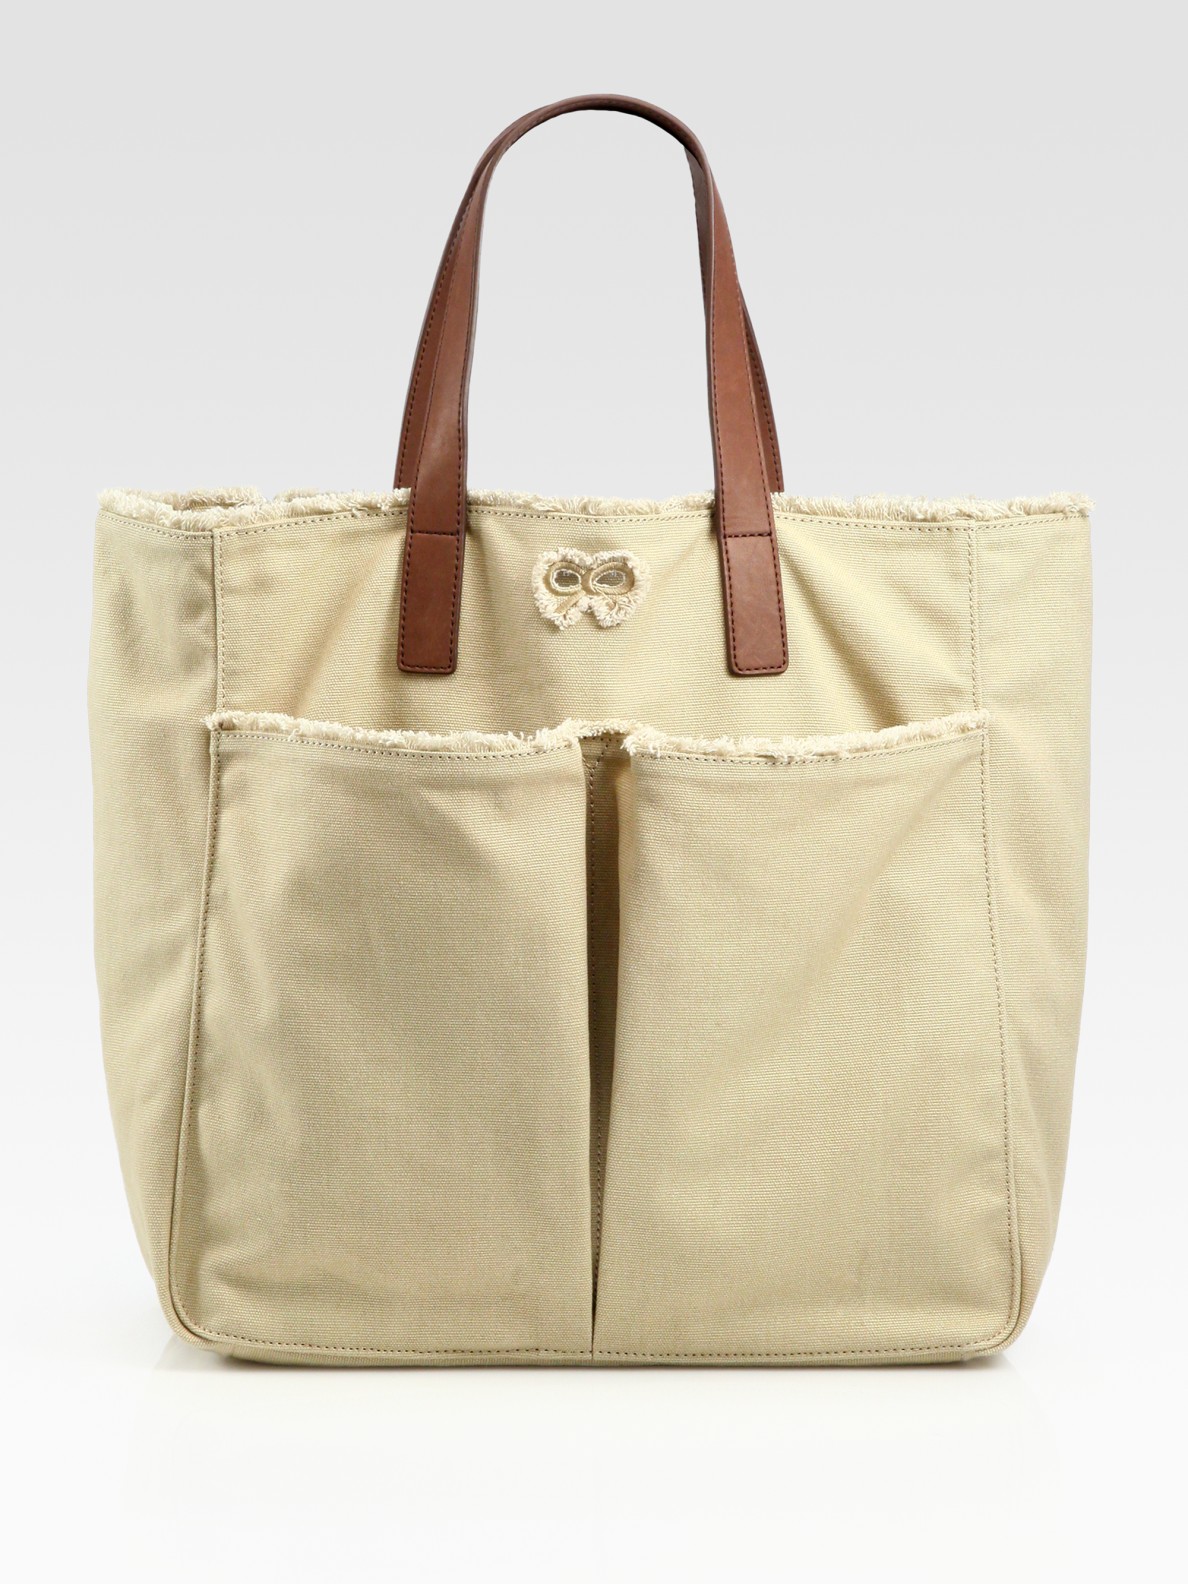 Anya Hindmarch Nevis Canvas Tote Bag in Beige | Lyst